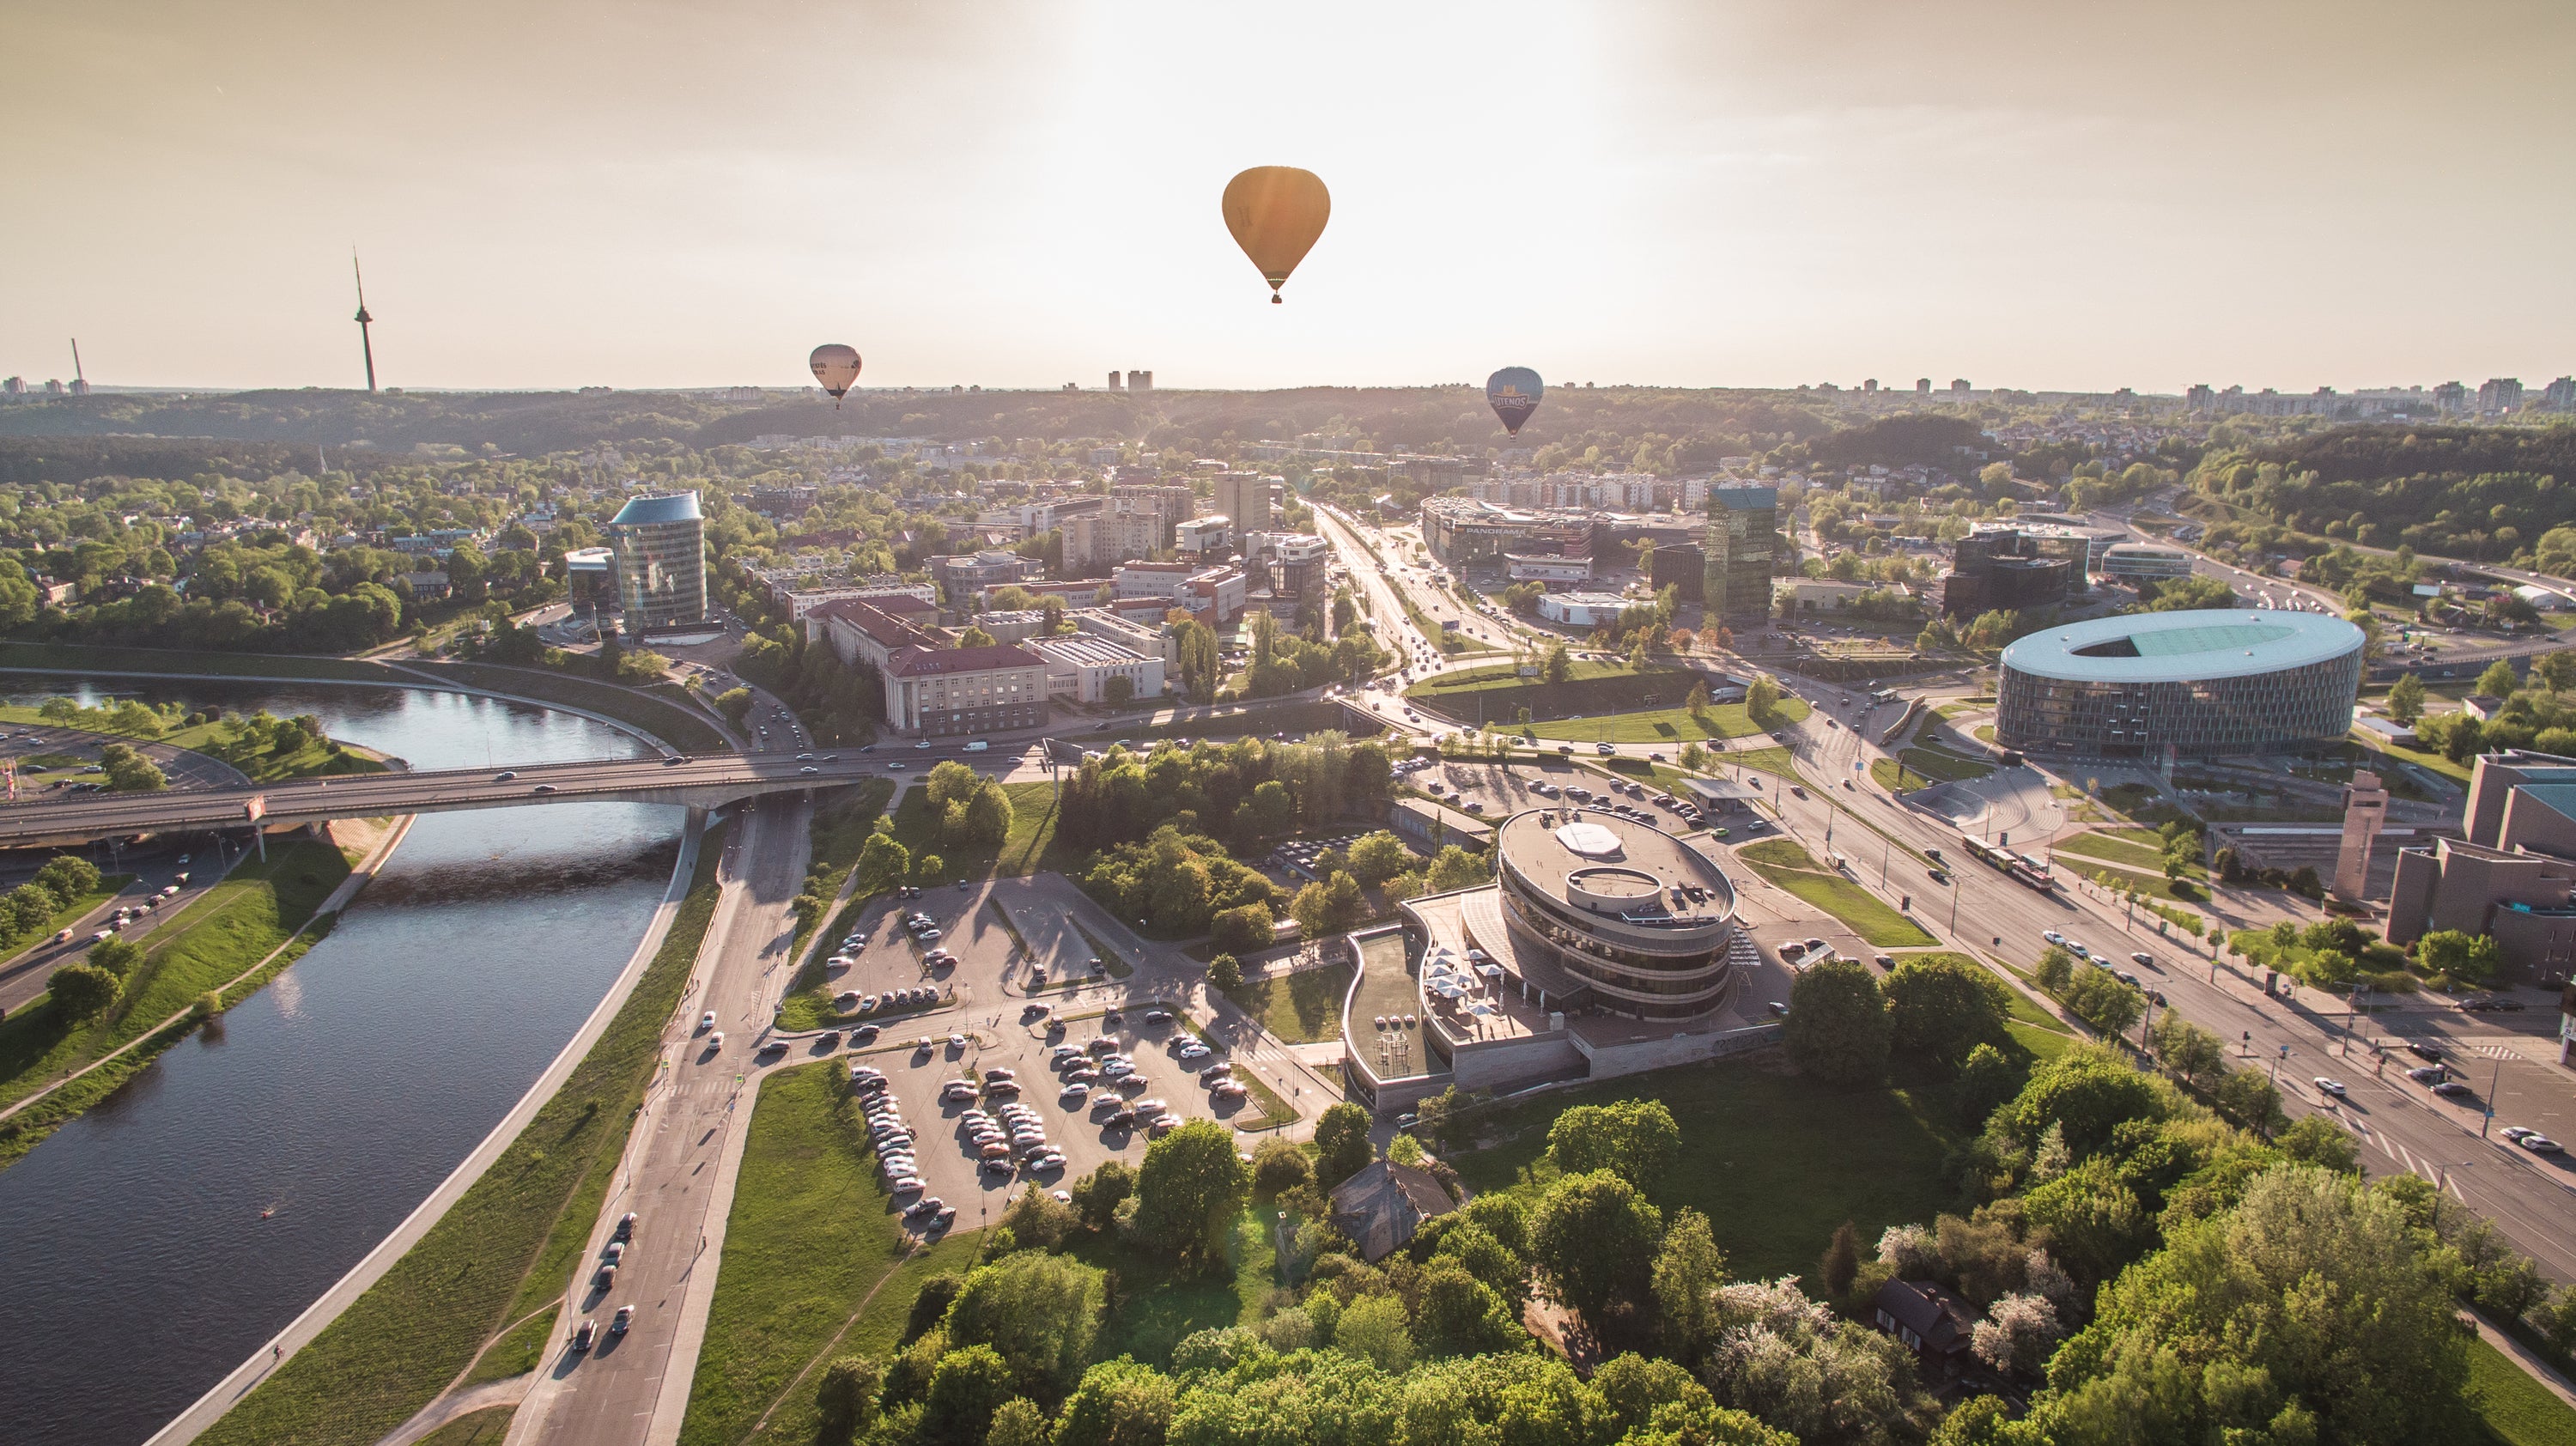 Hot air balloons are permitted to fly directly over the centre of Vilnius